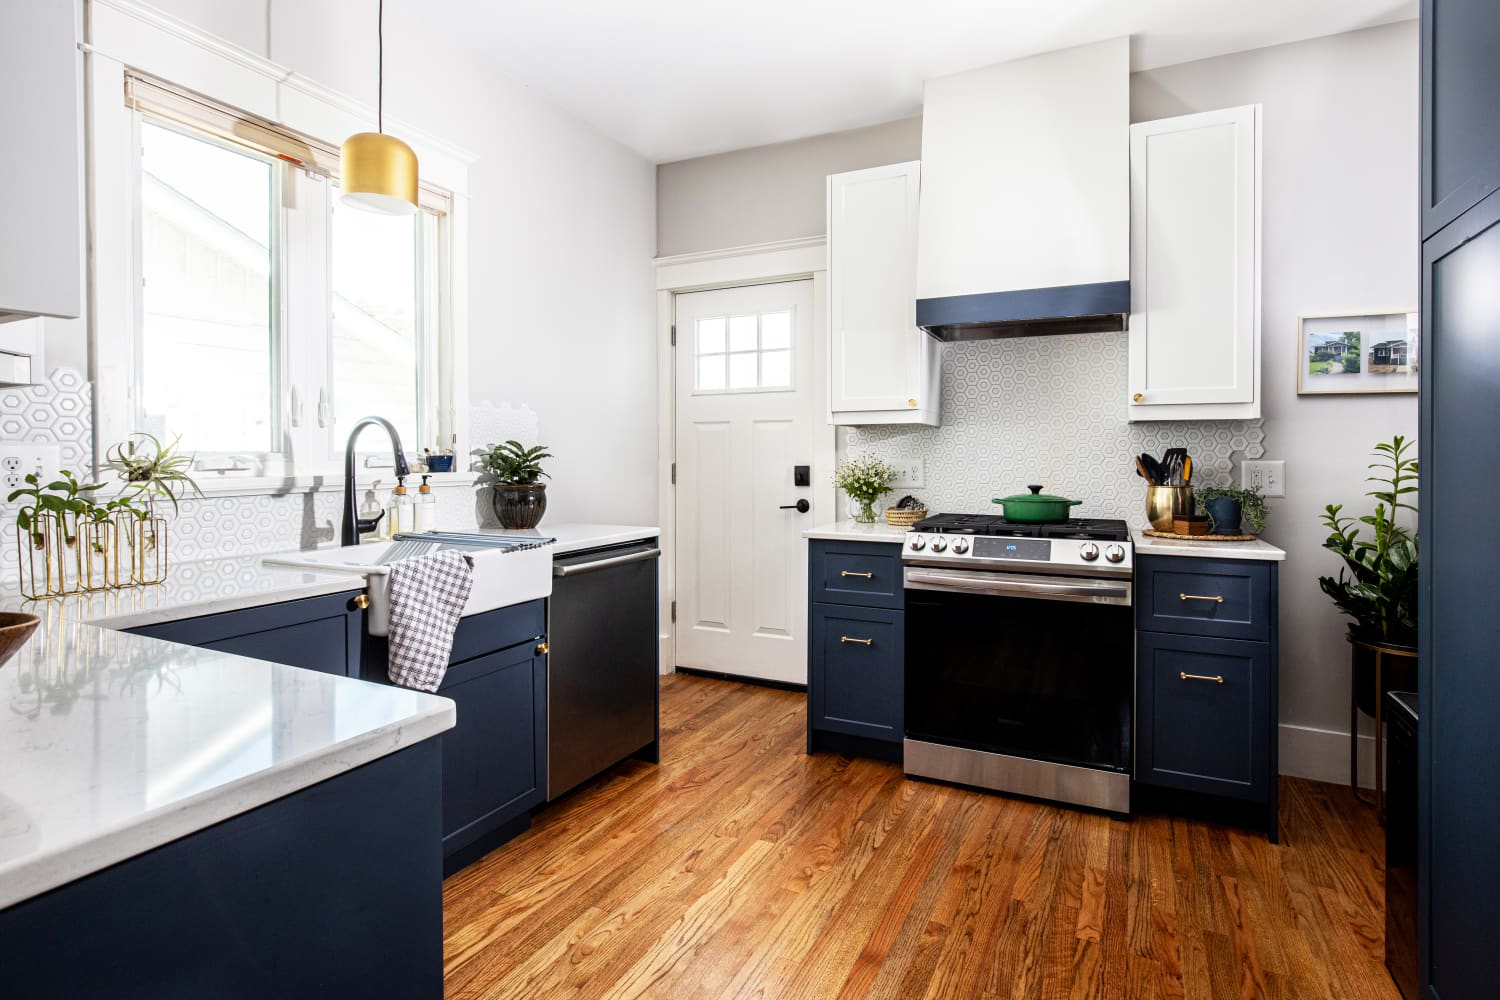 This Kitchen Got a Down-to-the-Studs Gut Renovation — Here’s How Every Dollar Was Spent